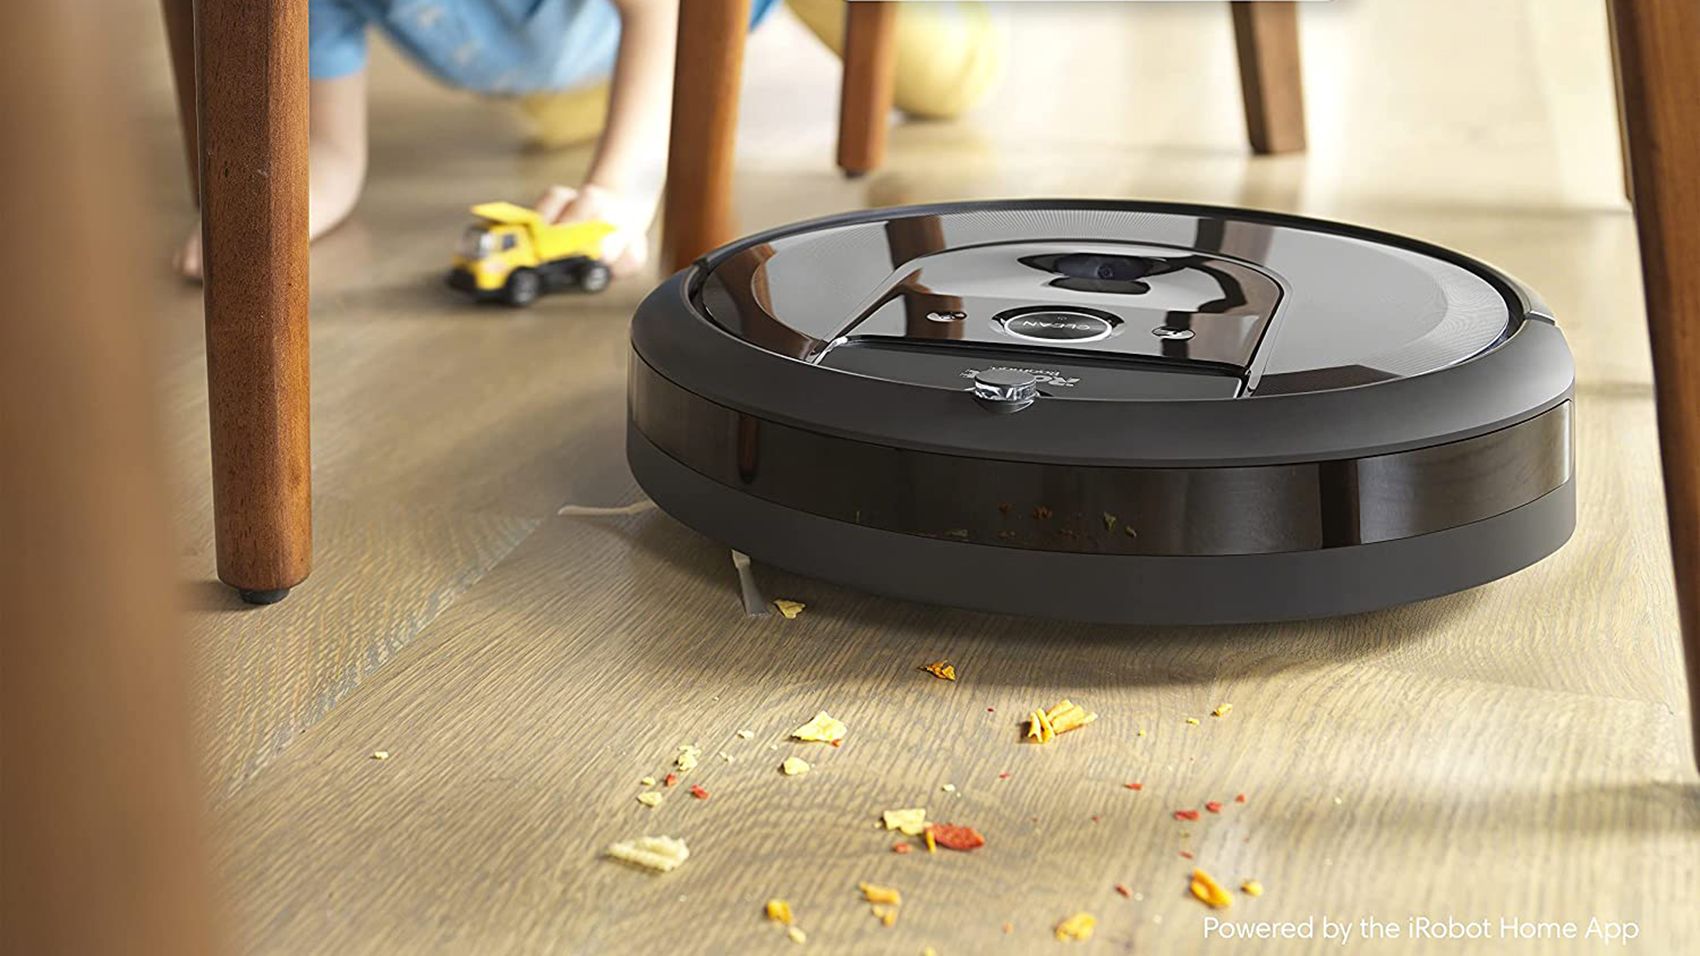 iRobot roomba i7 vacuum review: Can the smart robot keep your